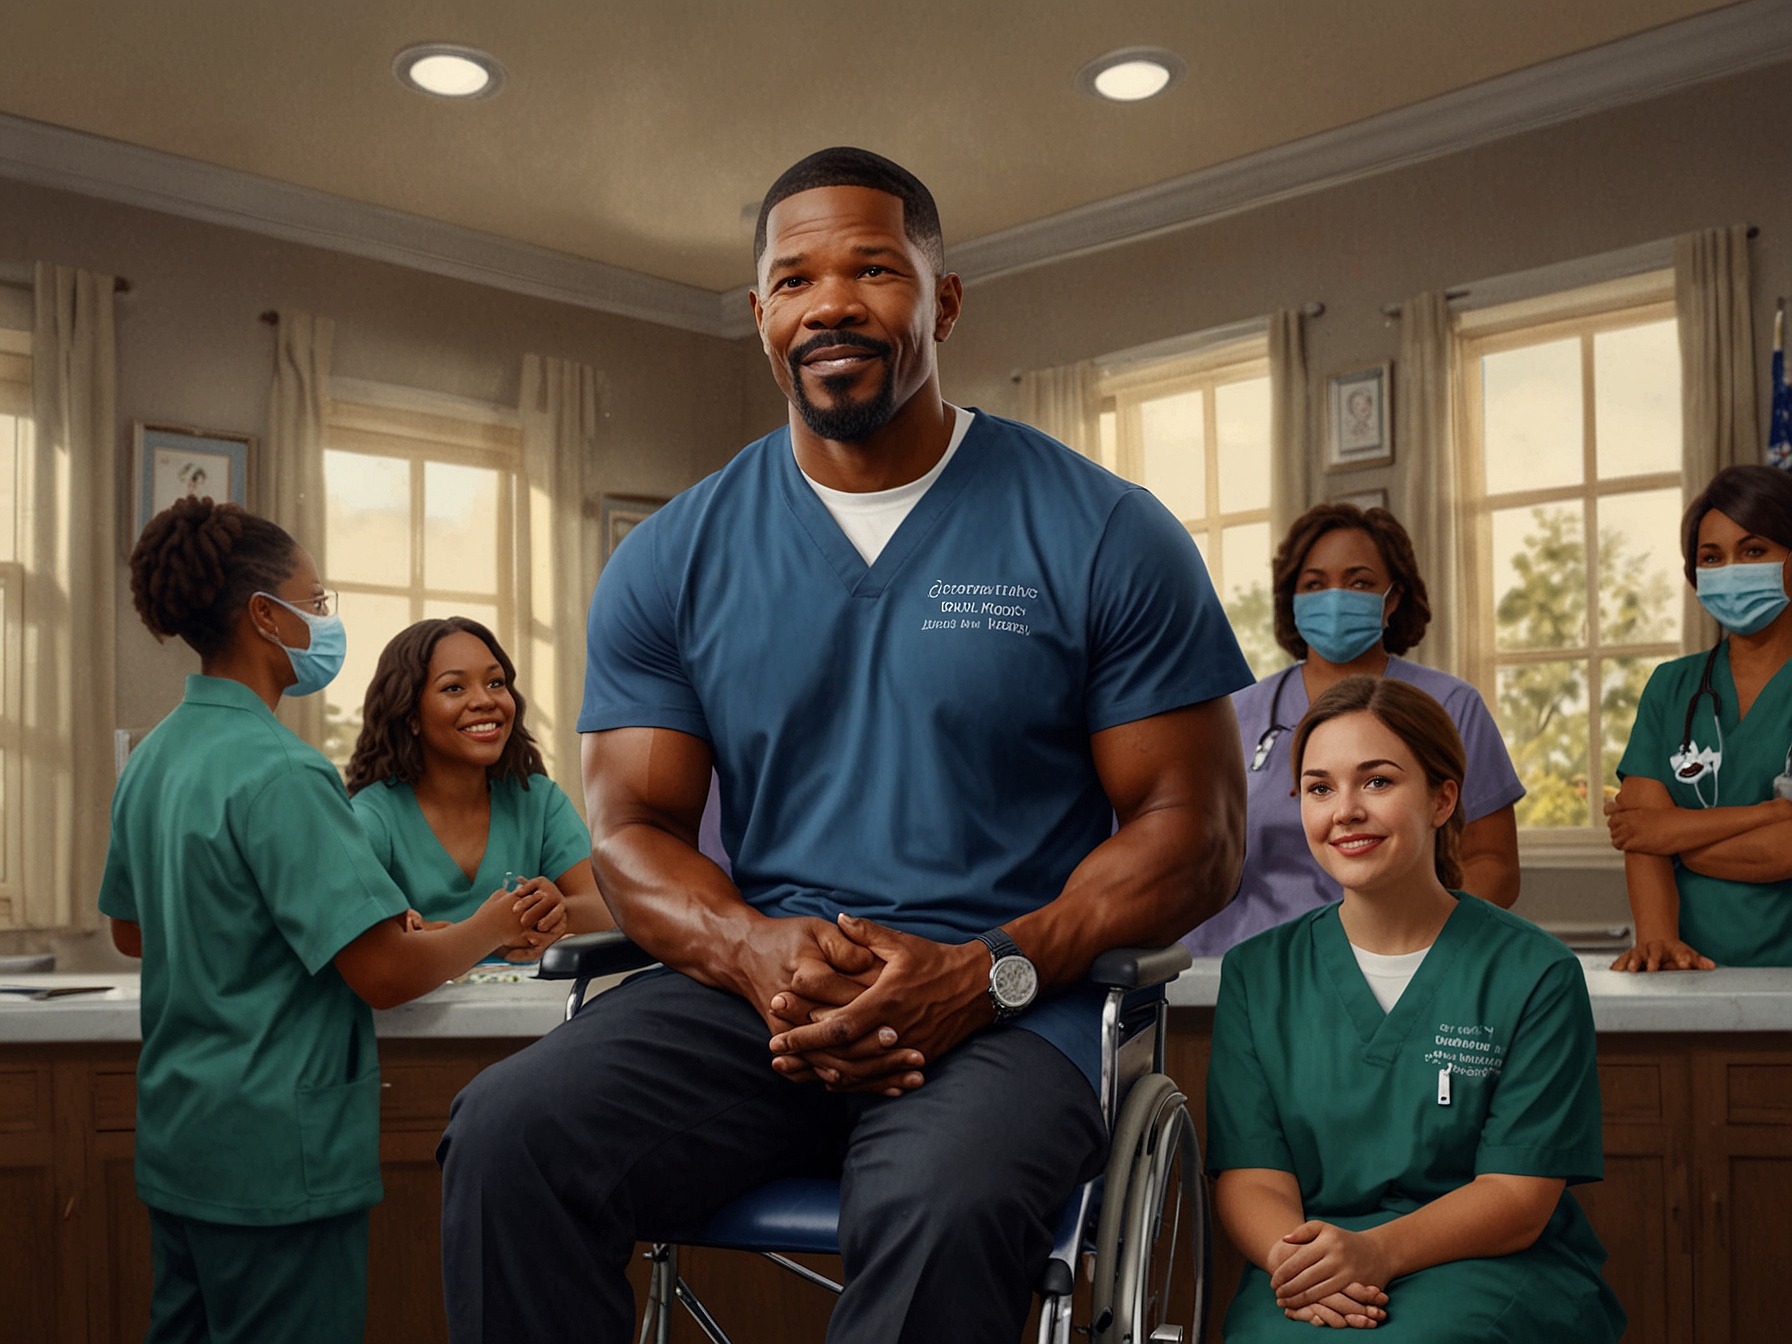 A grateful Jamie Foxx stands surrounded by supportive medical staff and family, illustrating the critical role loved ones played in his recovery.